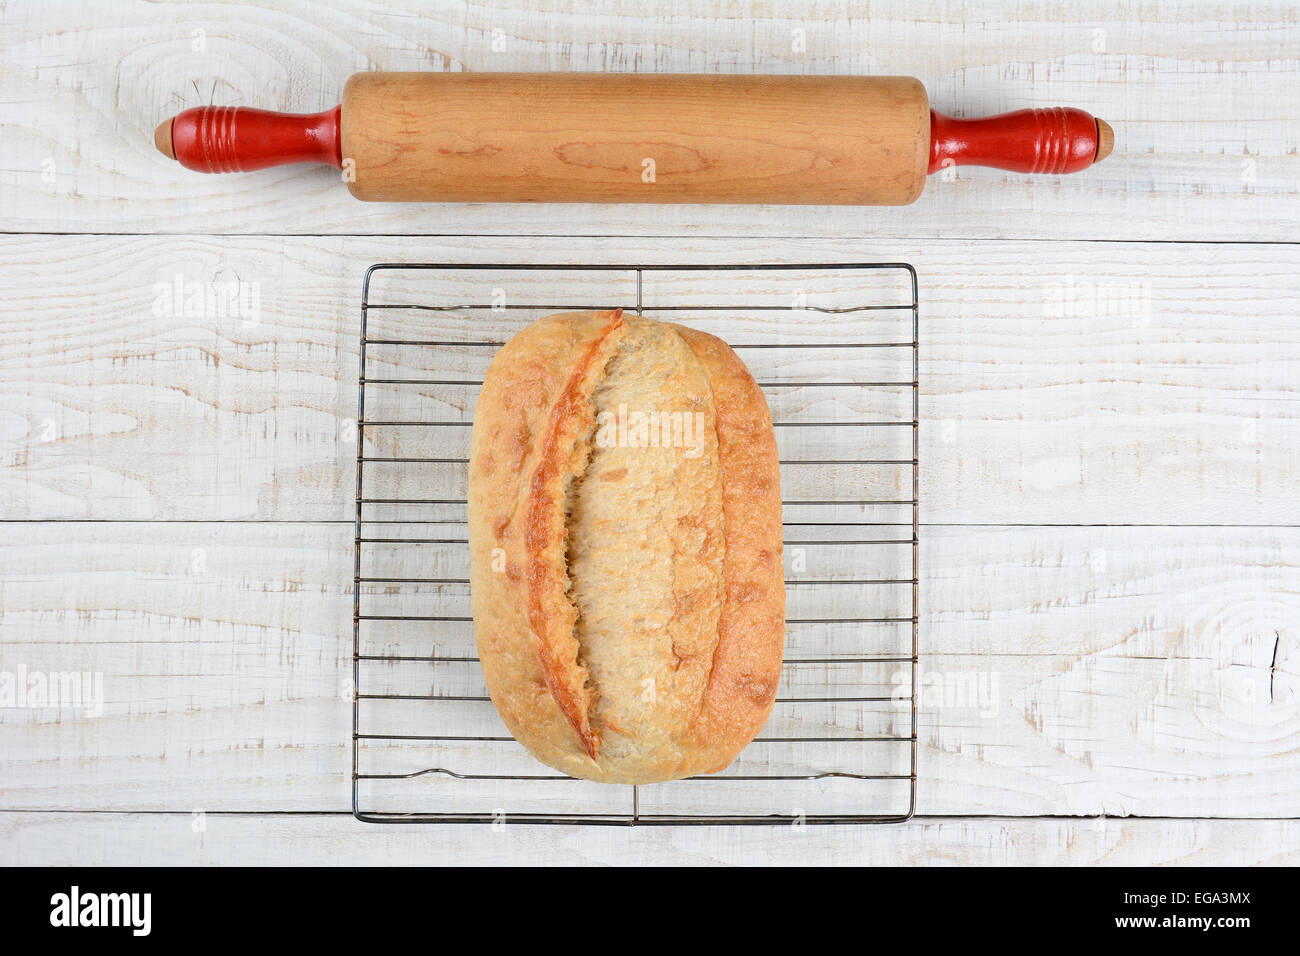 High angle shot of a rolling pin and a fresh baked loaf of bread on a cooling rack. Horizontal format on a rustic whitewashed ki Stock Photo